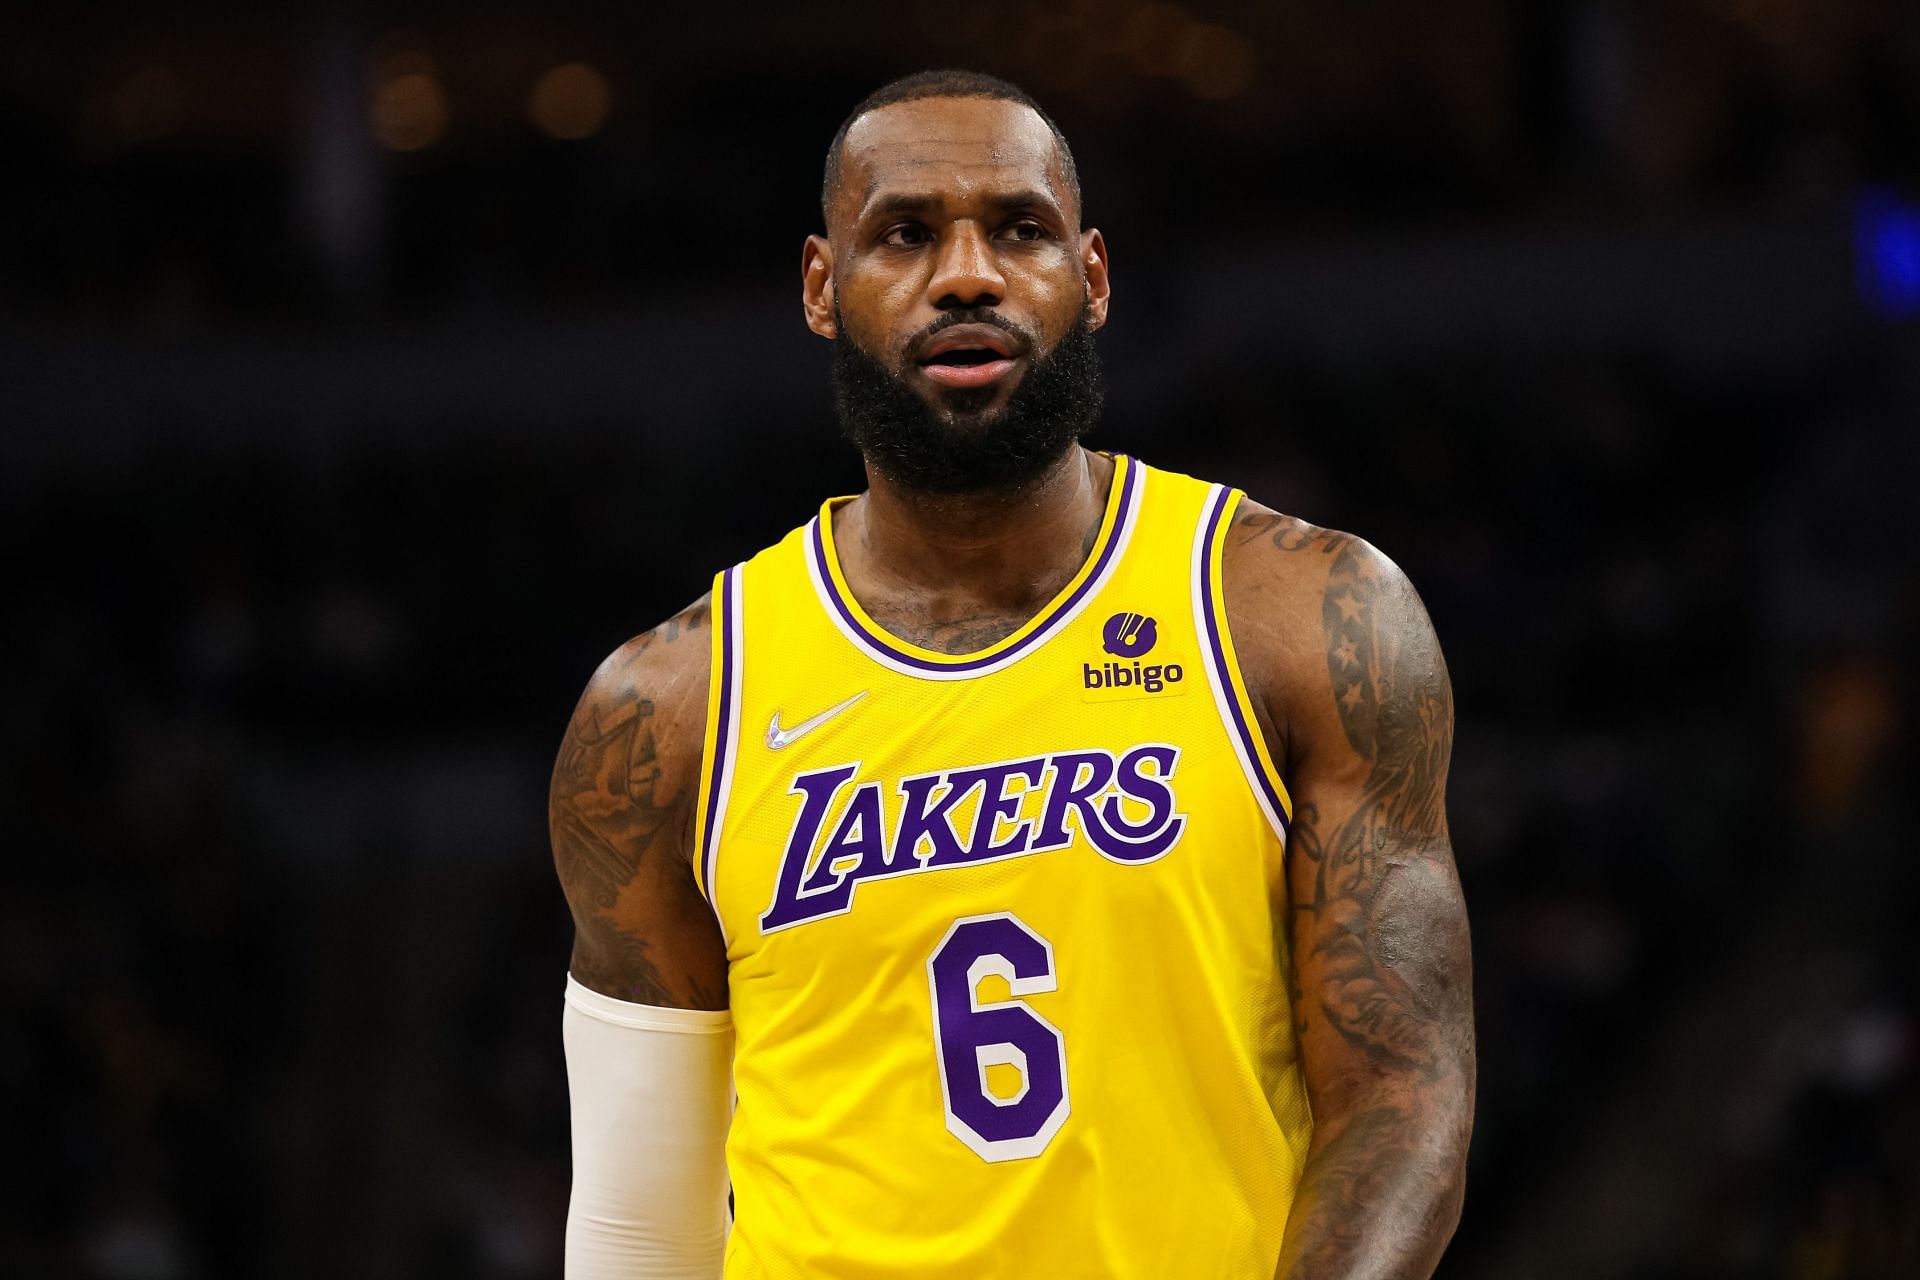 LeBron James of the Los Angeles Lakers could make history tonight